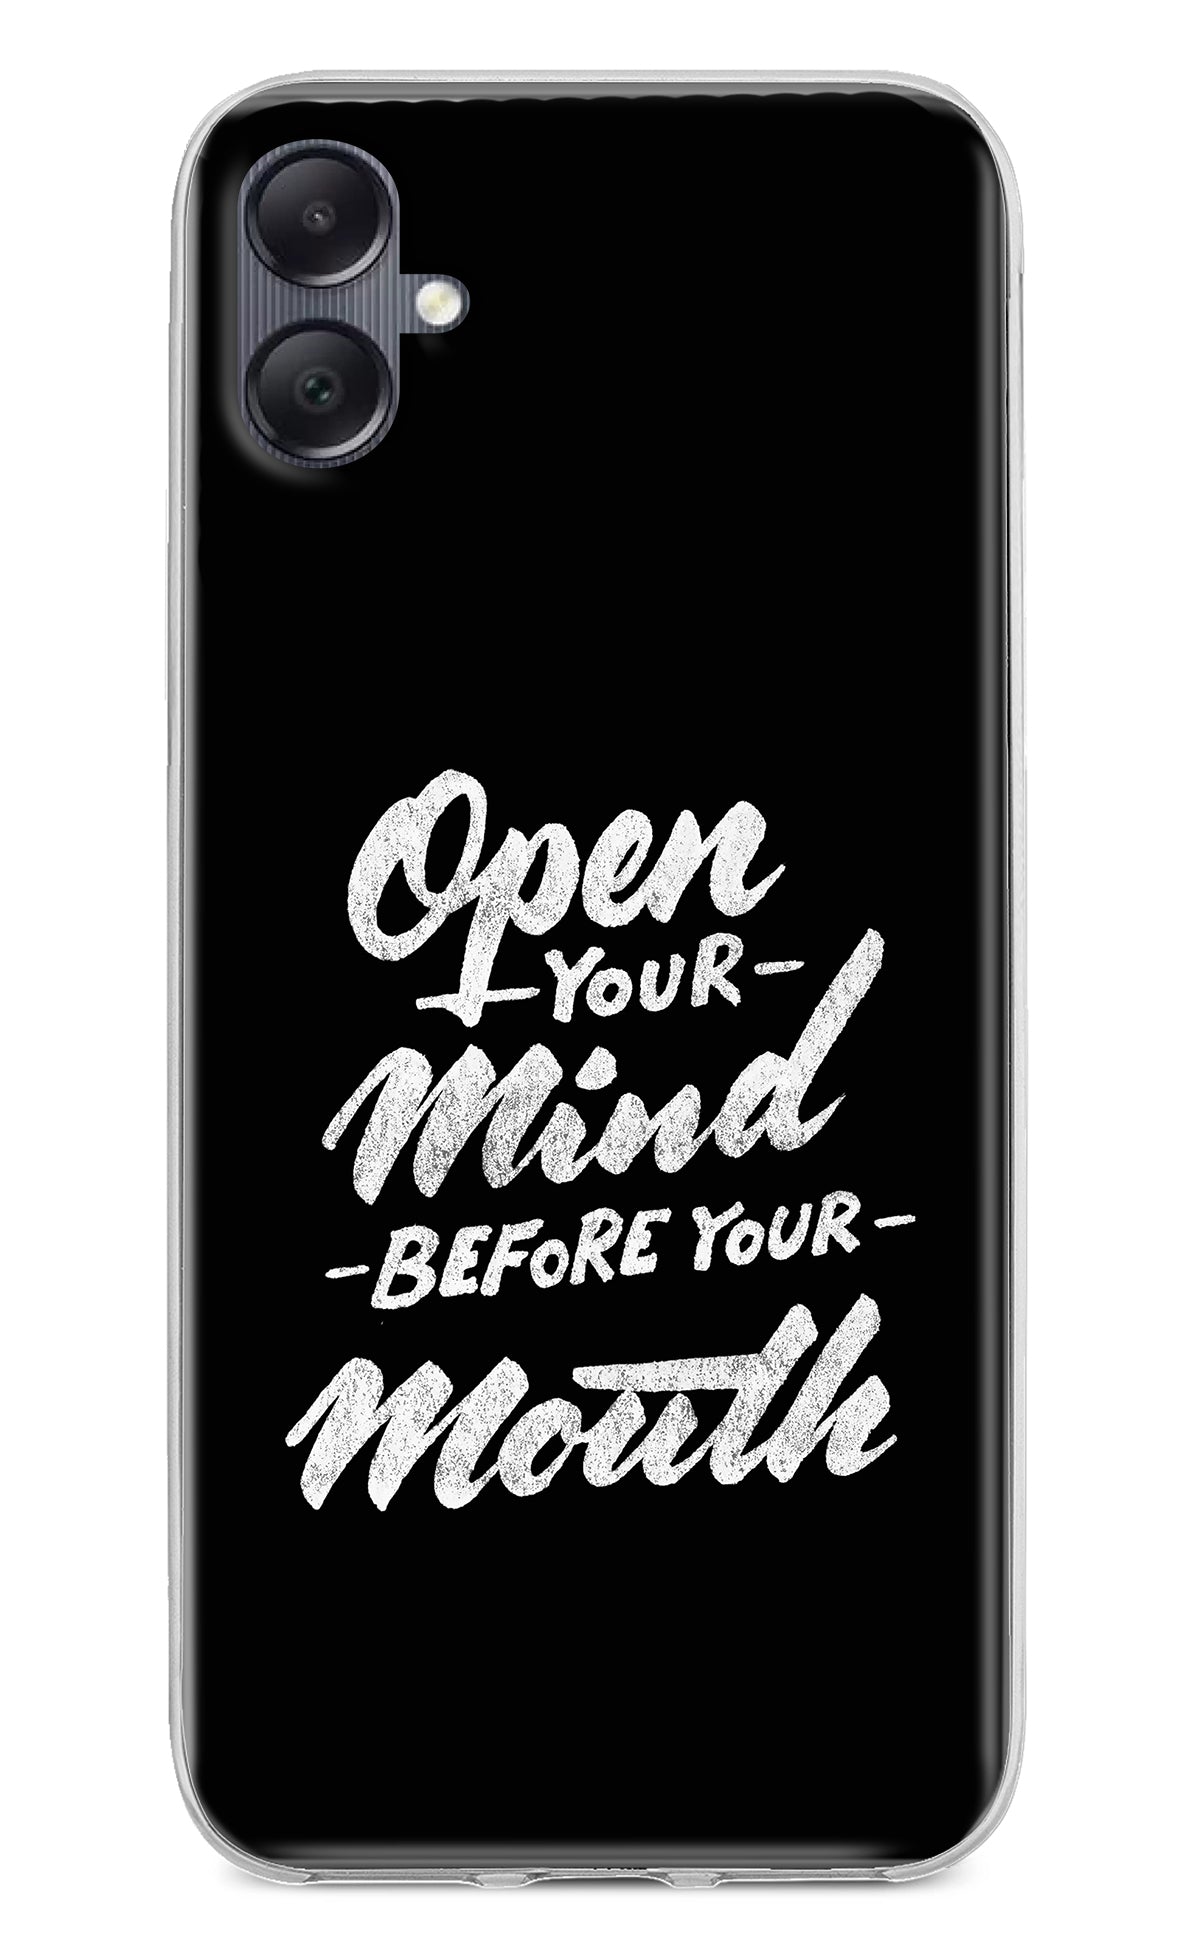 Open Your Mind Before Your Mouth Samsung A05 Back Cover